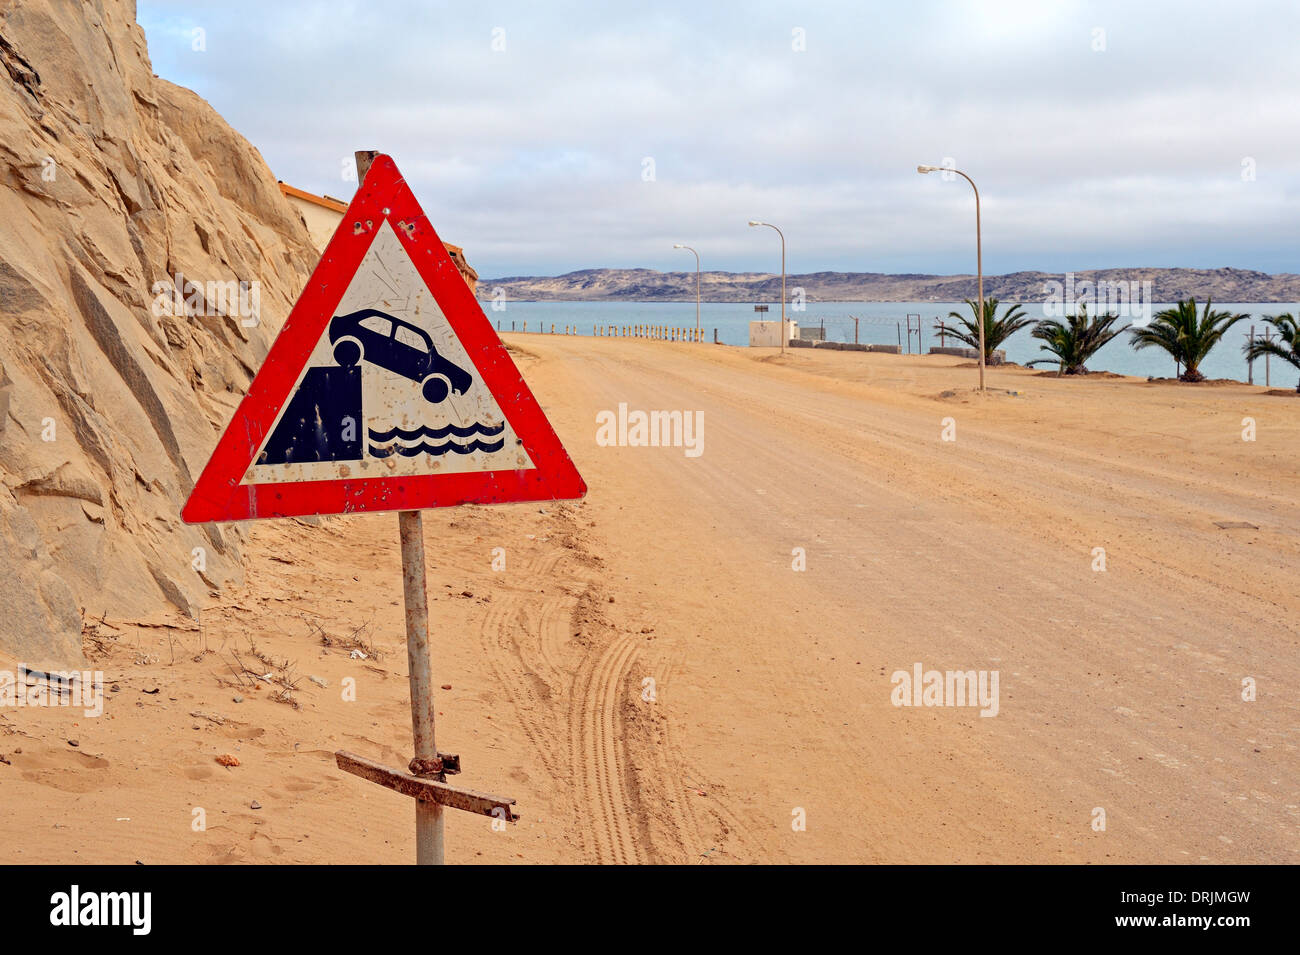 Warning for drivers before the fall in the water in Luederitz, Namibia, Africa, Warnschild fuer Autofahrer vor dem Absturz ins W Stock Photo